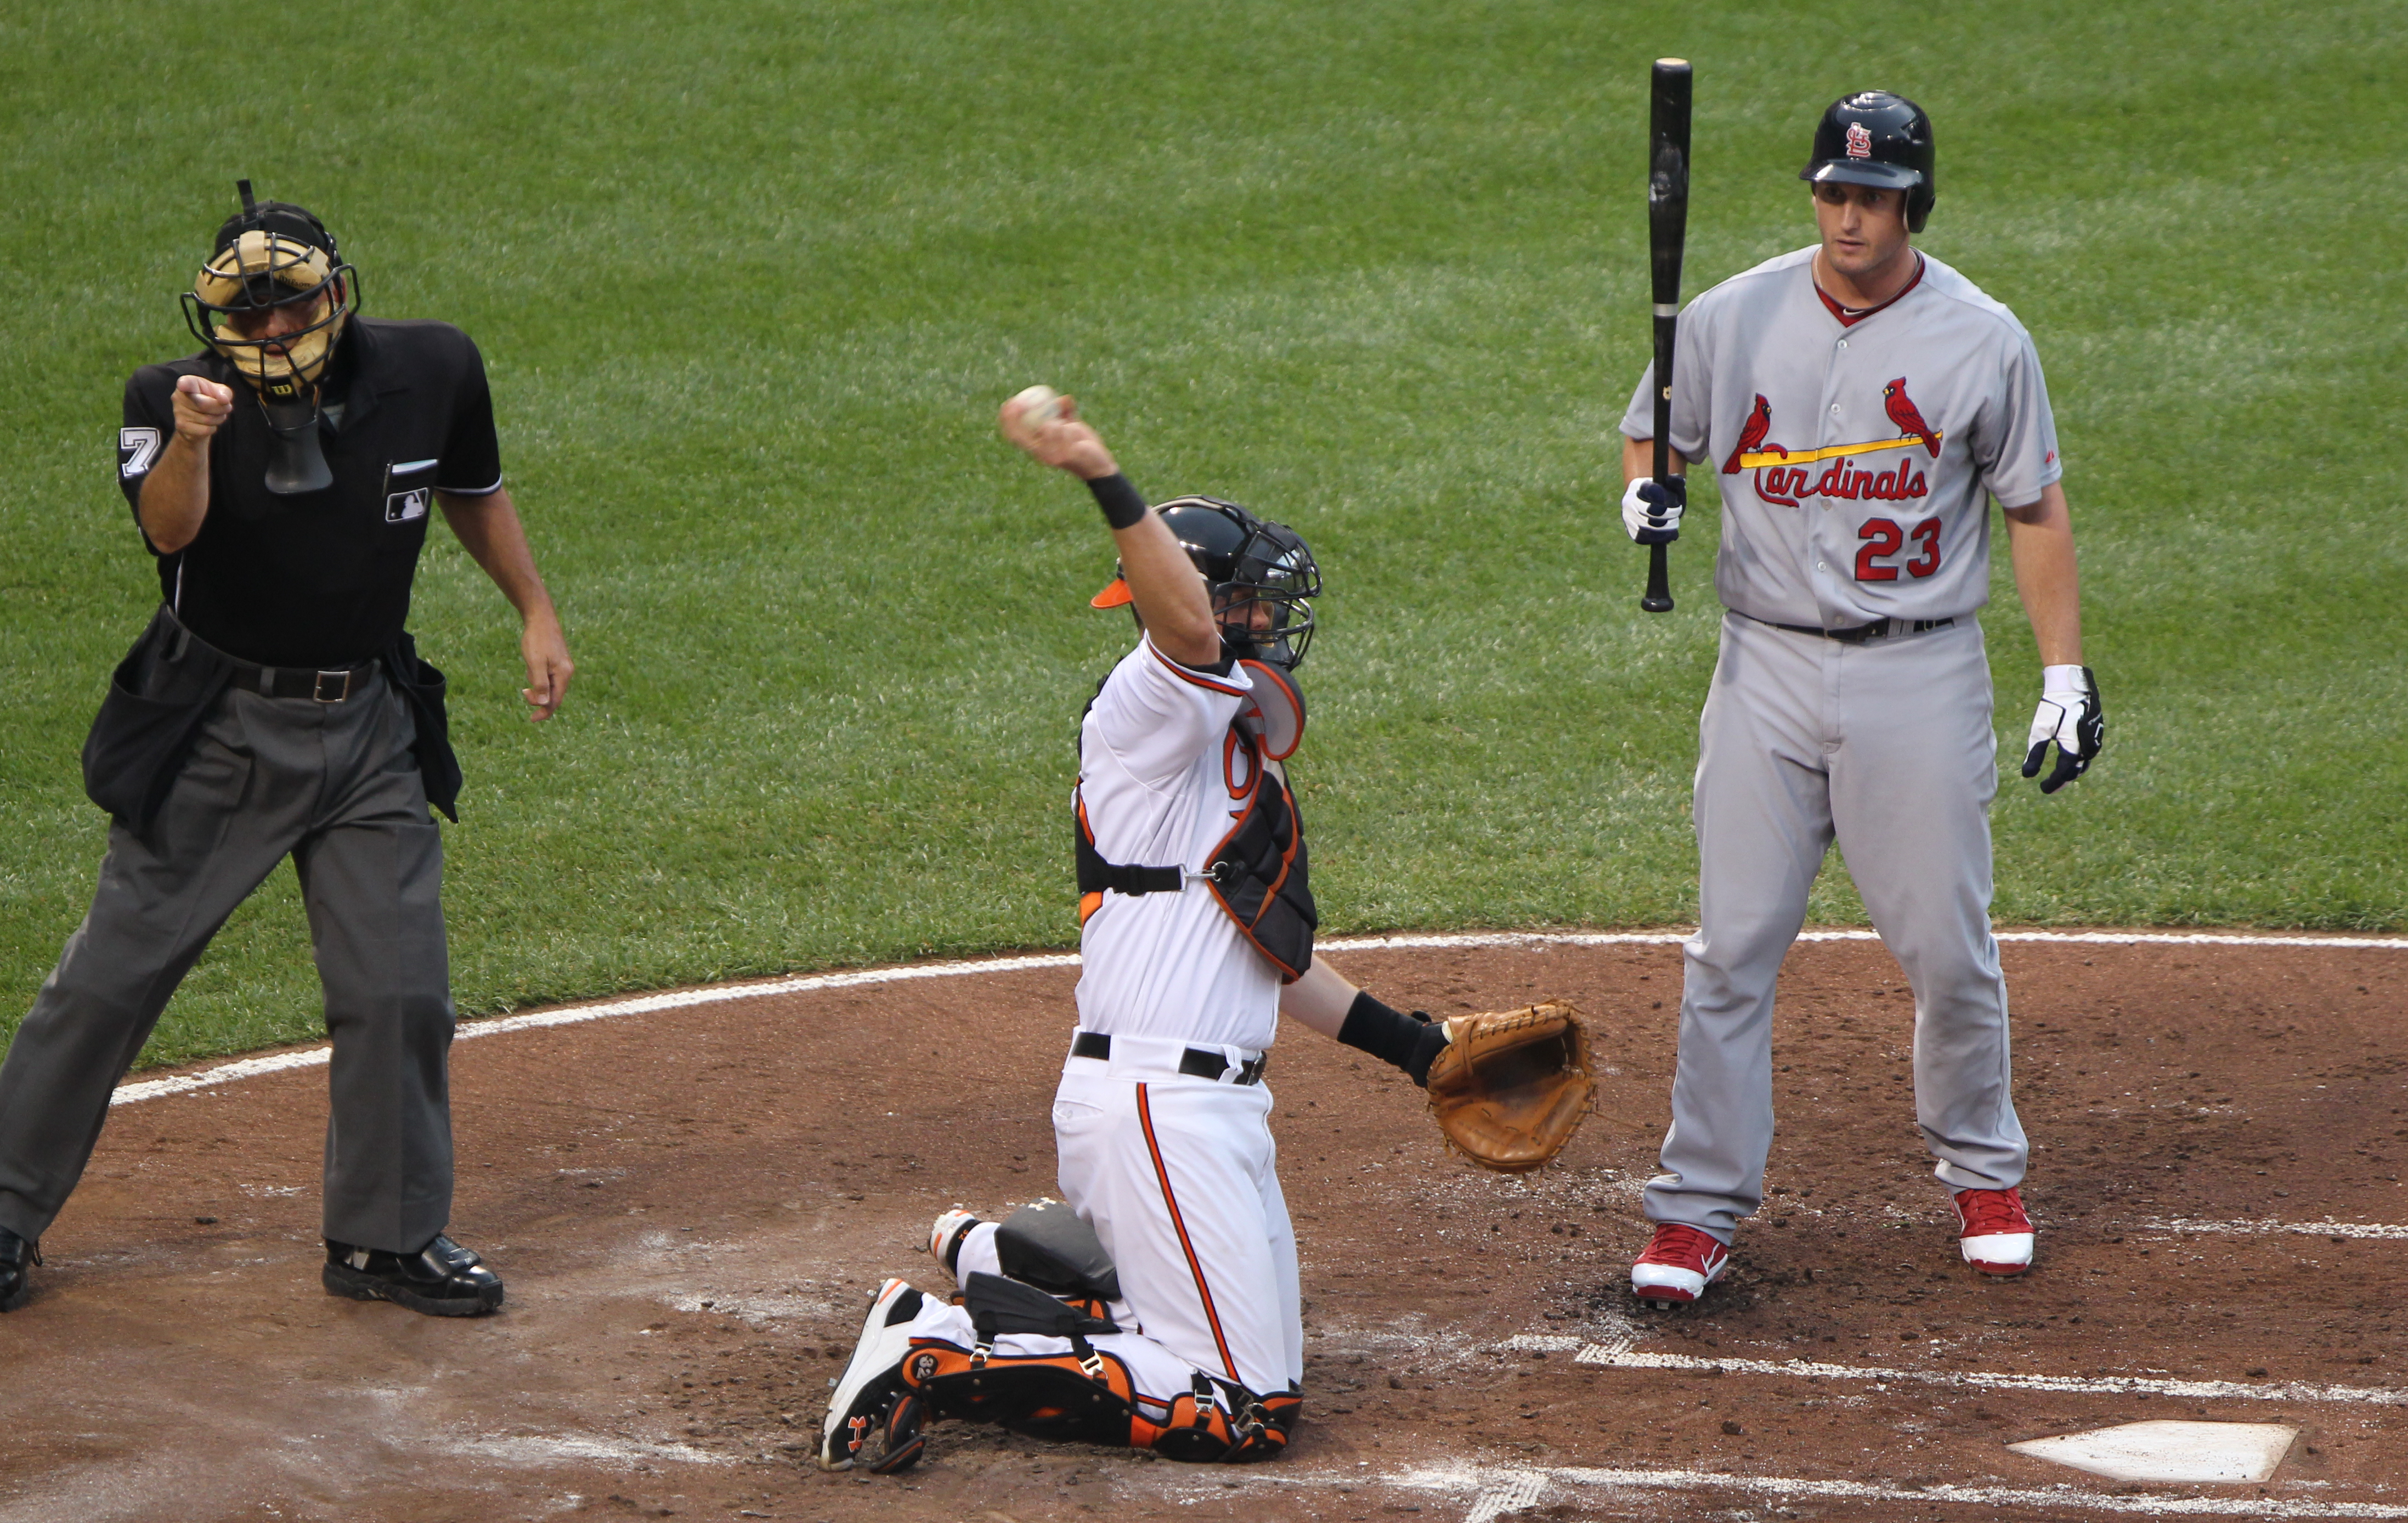 File:David Freese batting at Orioles game.jpg - Wikimedia Commons